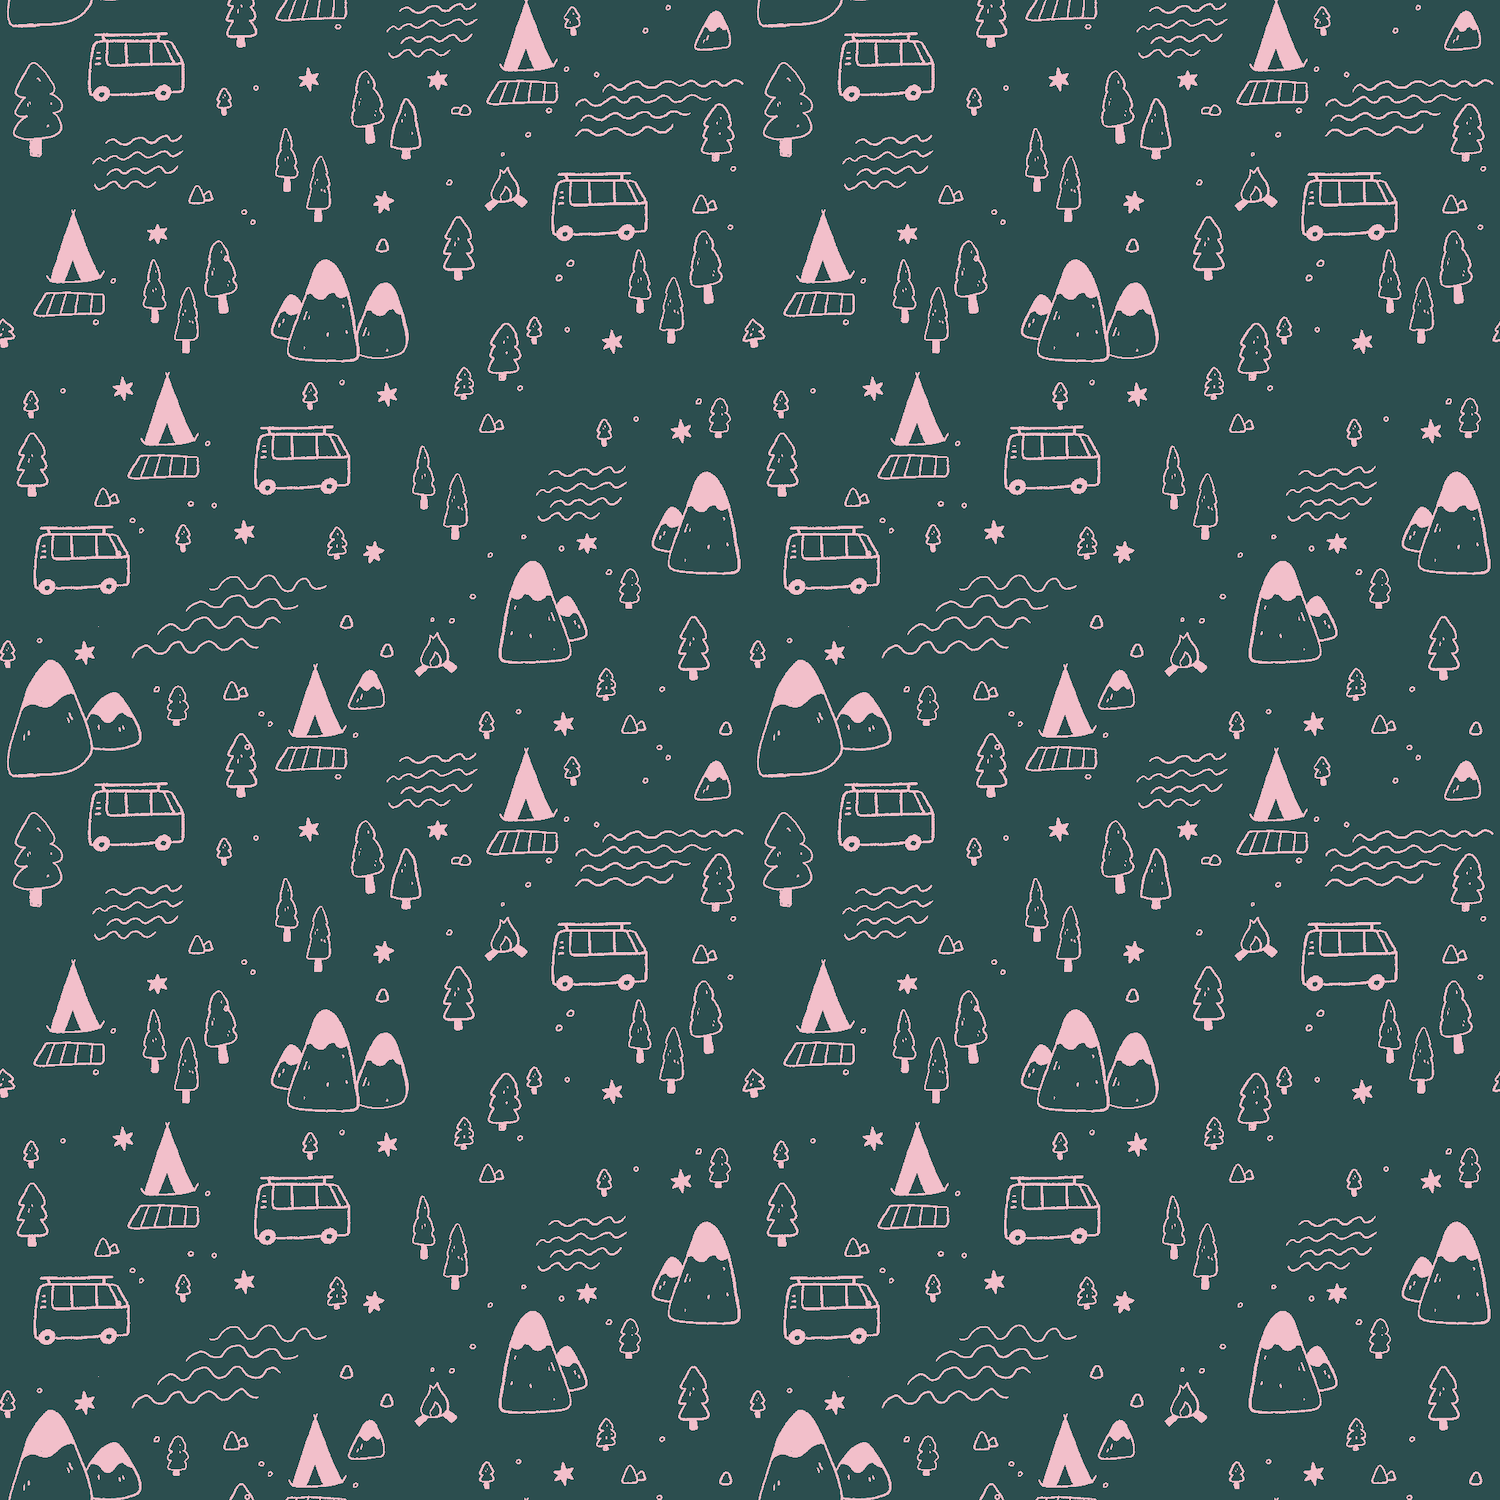 vicky-hughes-wild-camping-pattern.png